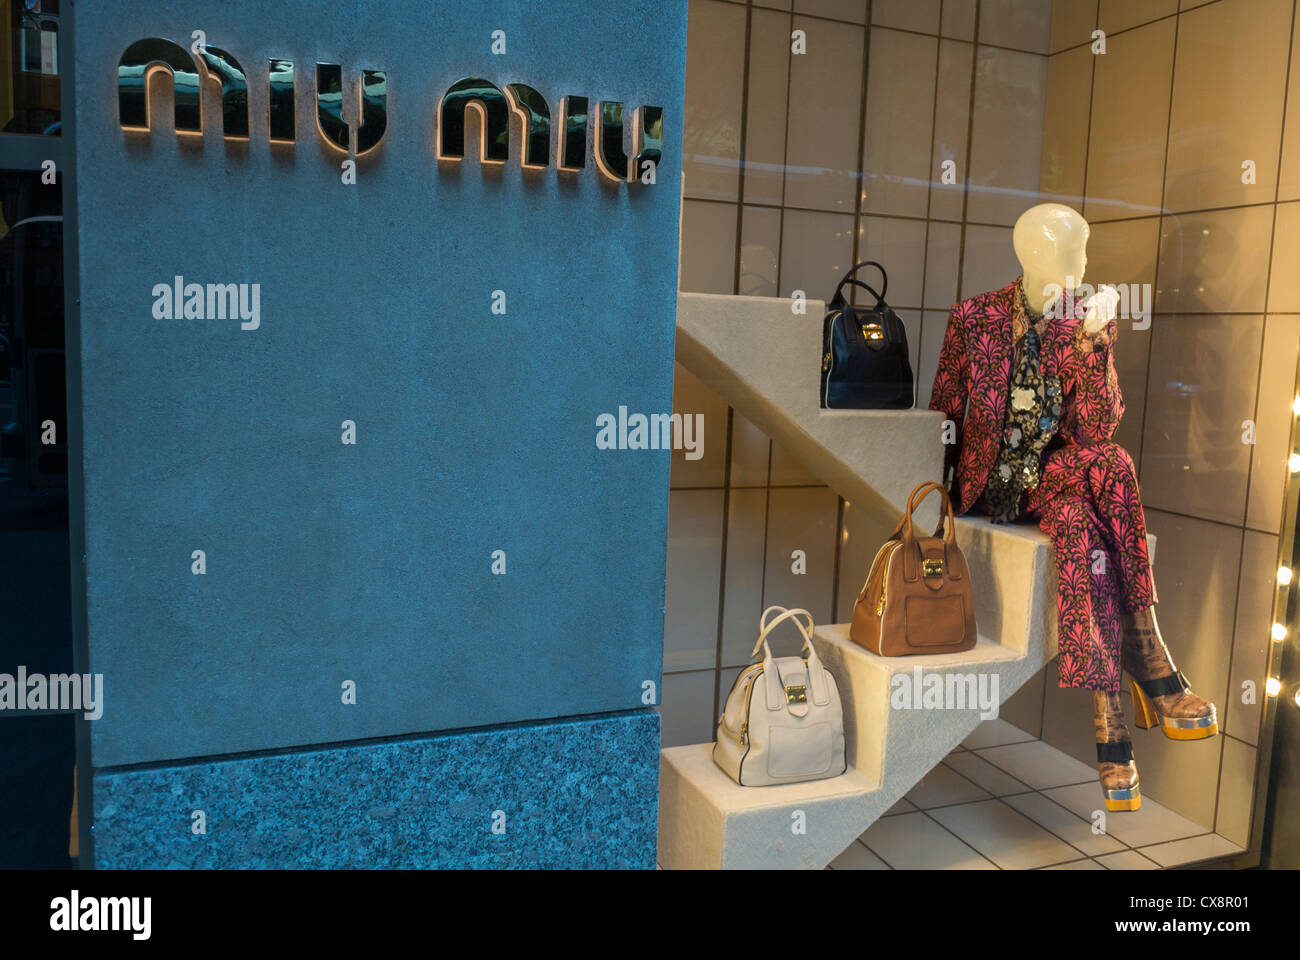 New York, NY, USA, Shopping, sign, Luxury Shops, 'Miu Miu' French Fashion Designer SHop Front Window, on 57th st., Manhattan , fashion clothes shop name, mannequins, retail display Stock Photo